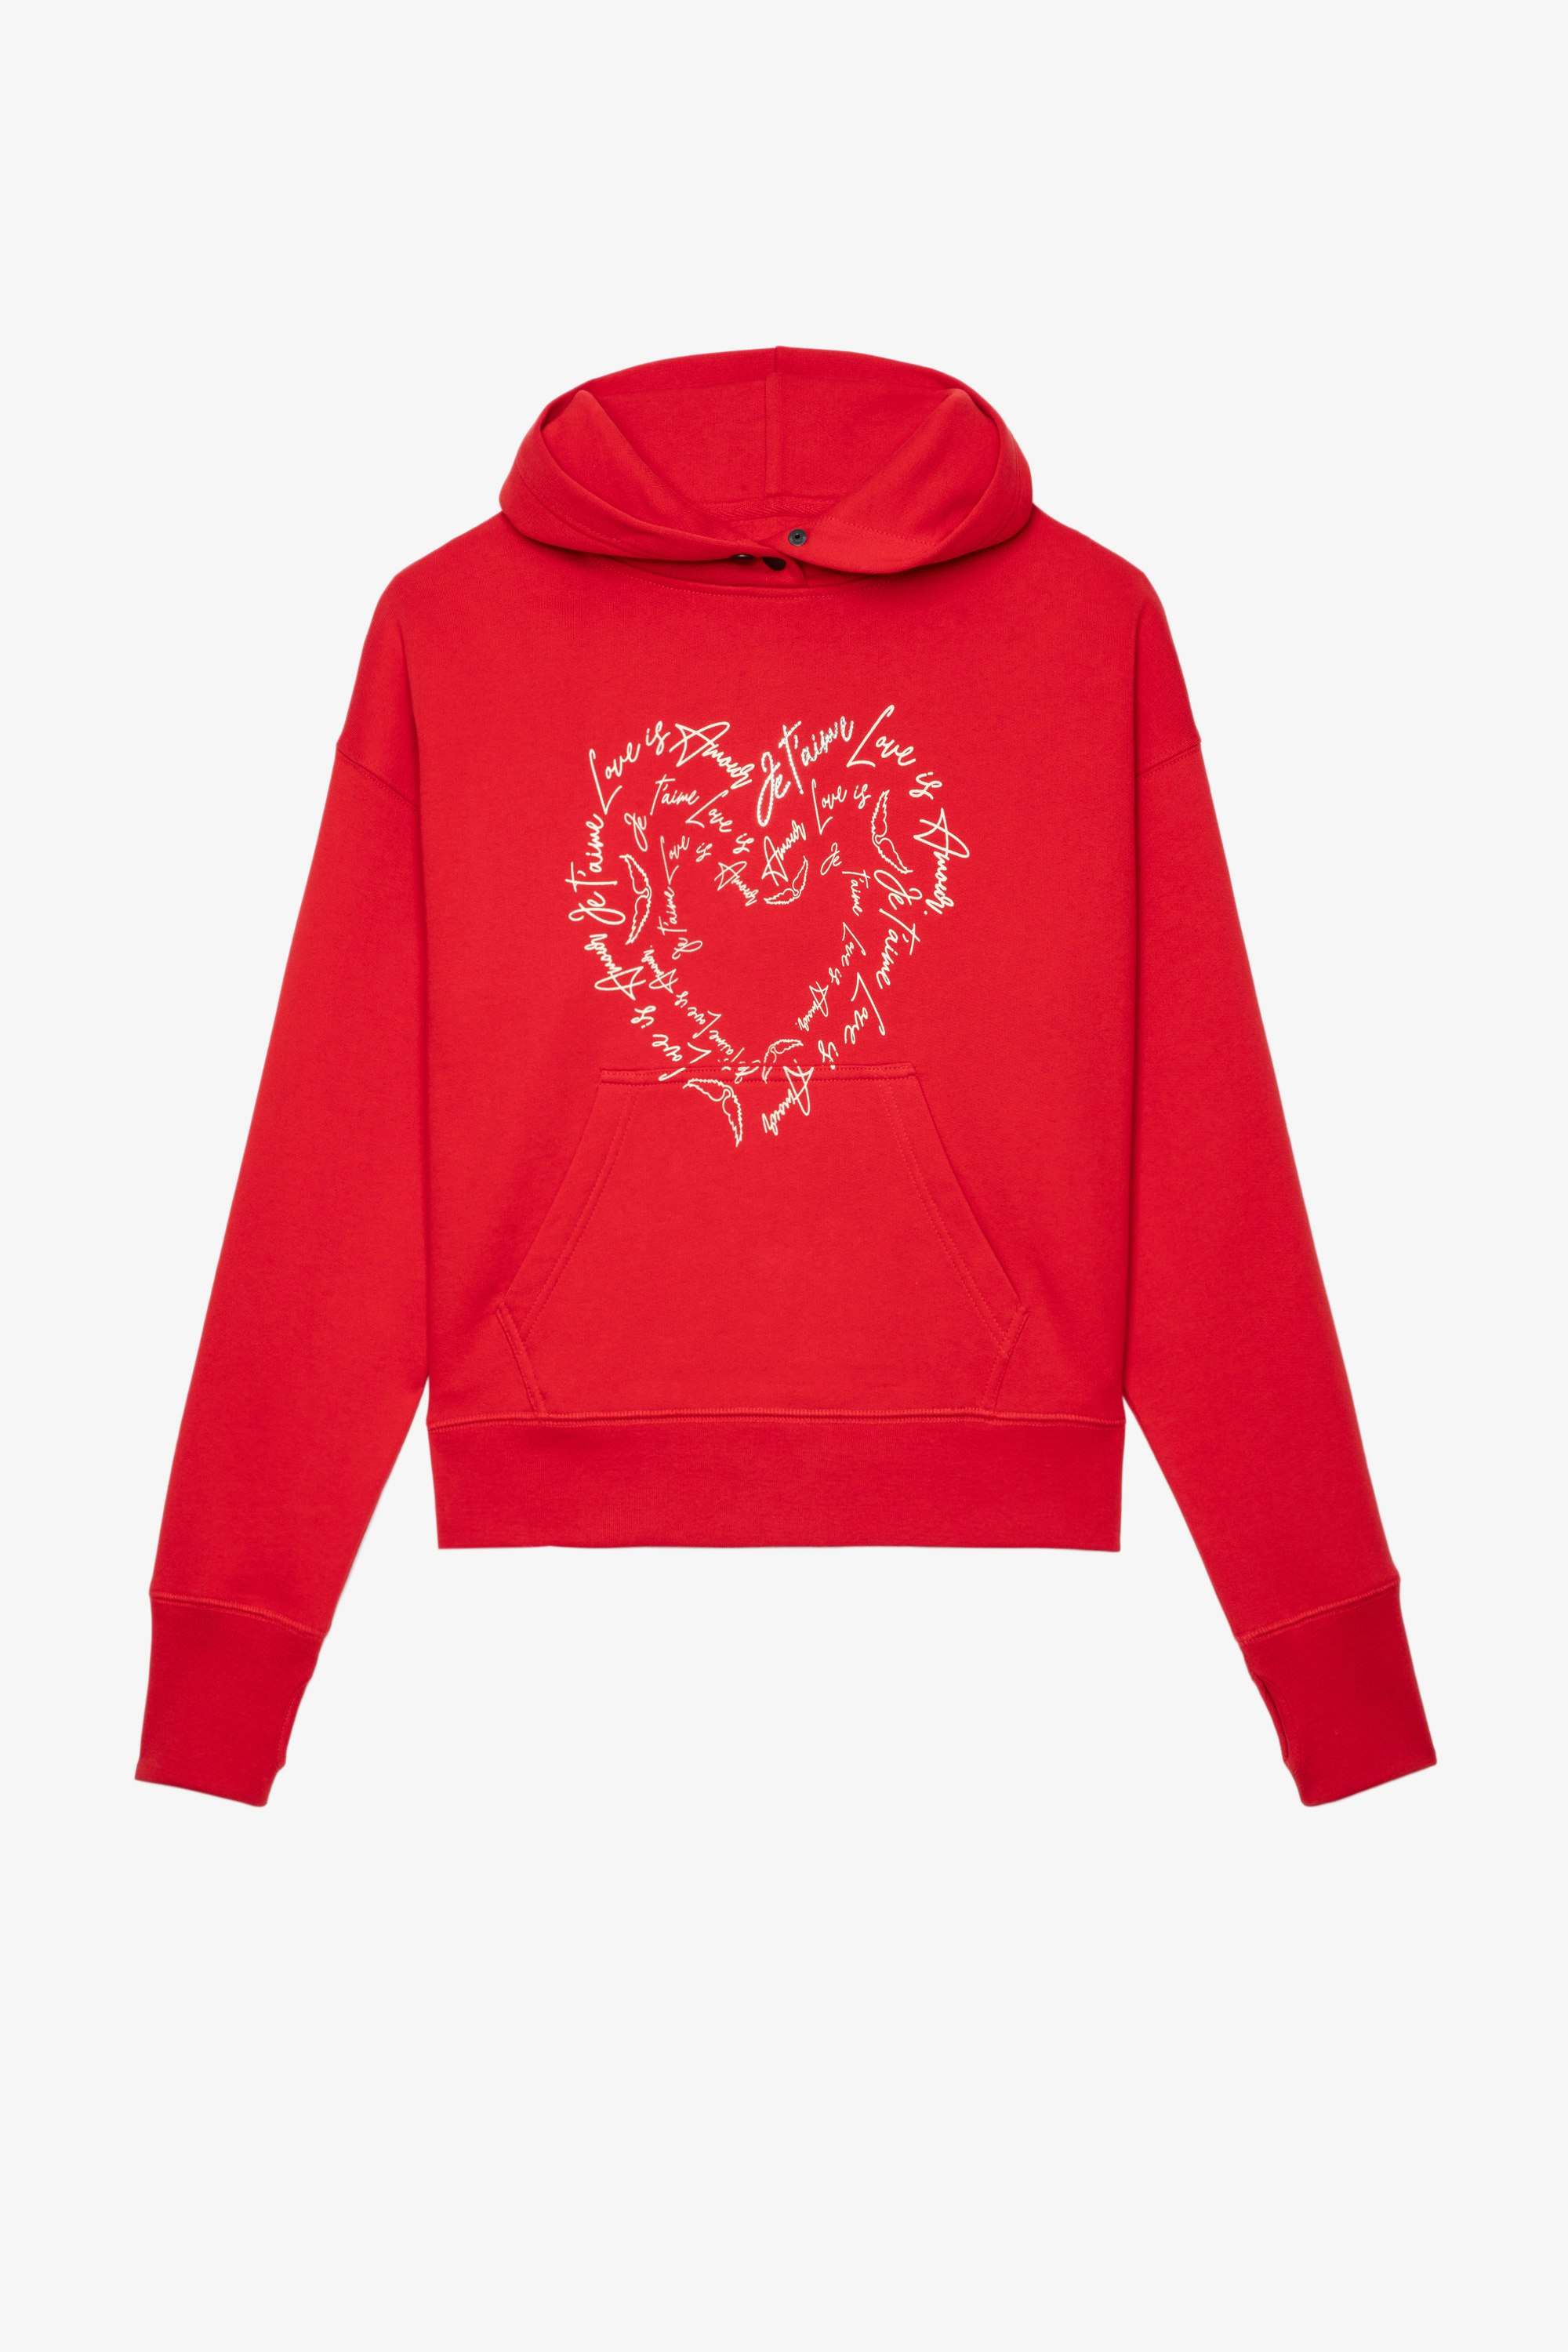 Mia Sweatshirt Women’s red cotton hooded sweatshirt with heart-shaped messages of love